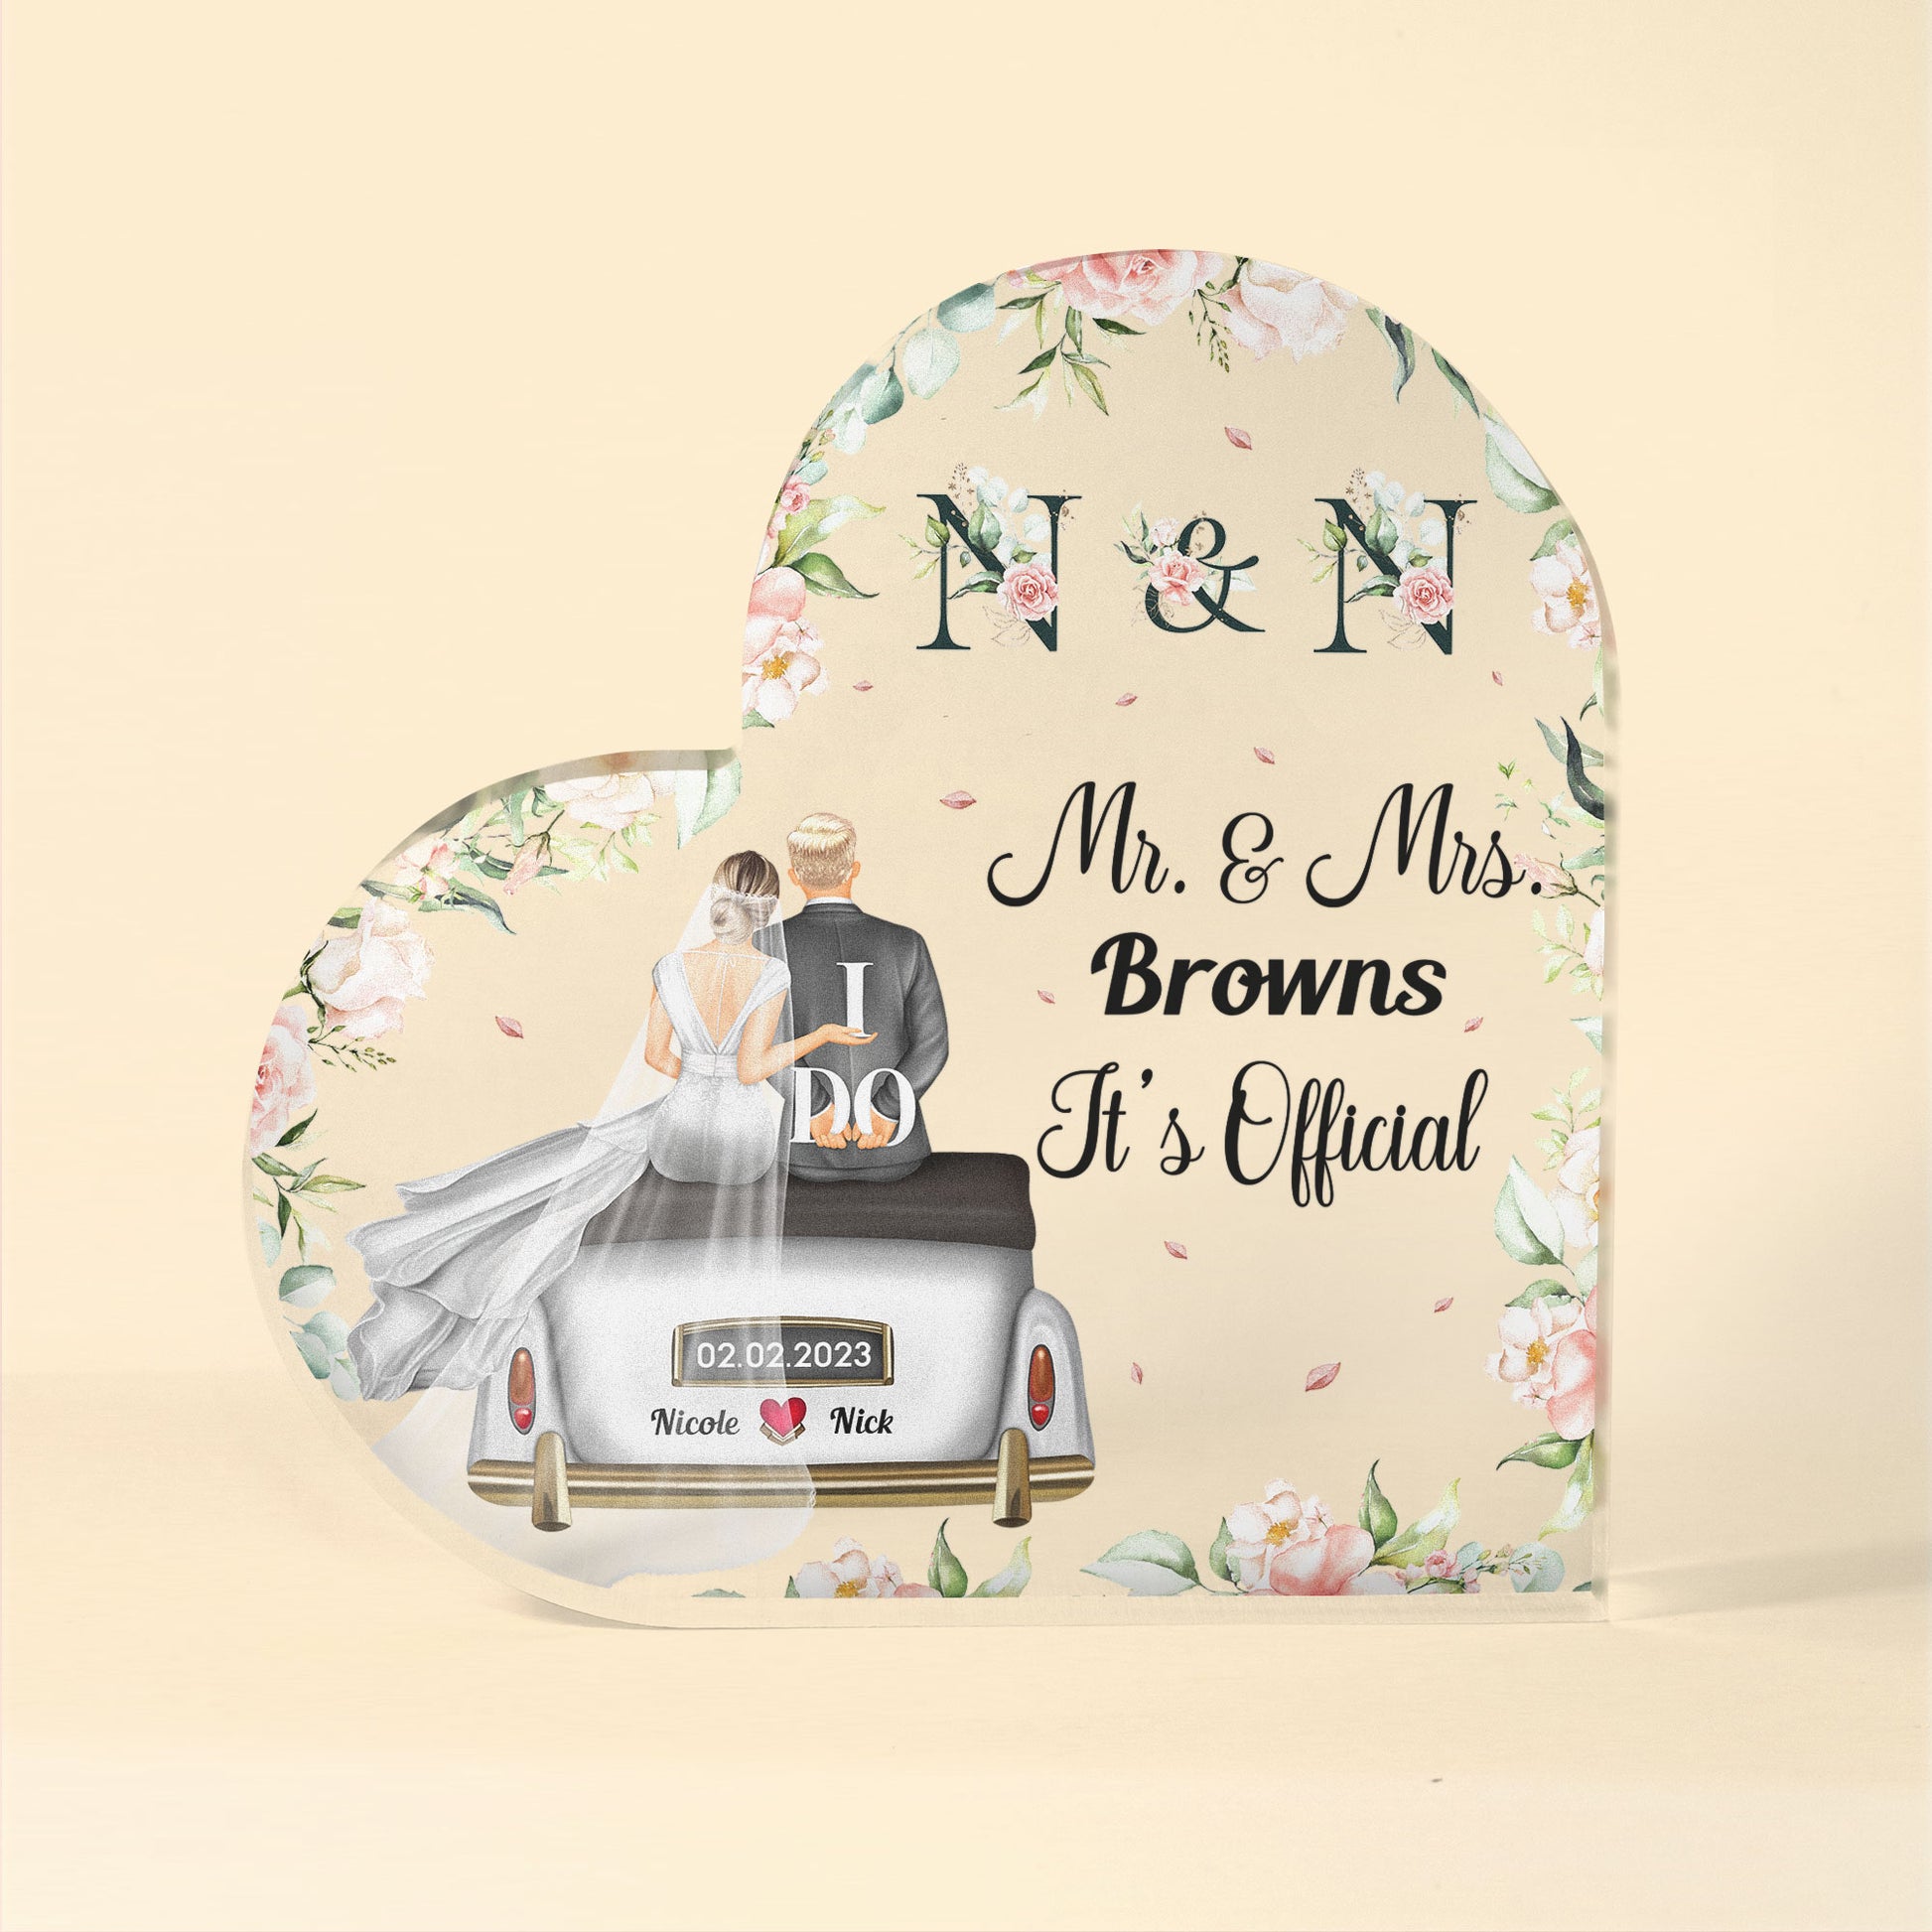 It's Official Mr. & Mrs. - Personalized Heart Shaped Acrylic Plaque - Wedding, Anniversary, Loving Gift For Newly Wed Couples, Hubby & Wifey, Husband & Wife